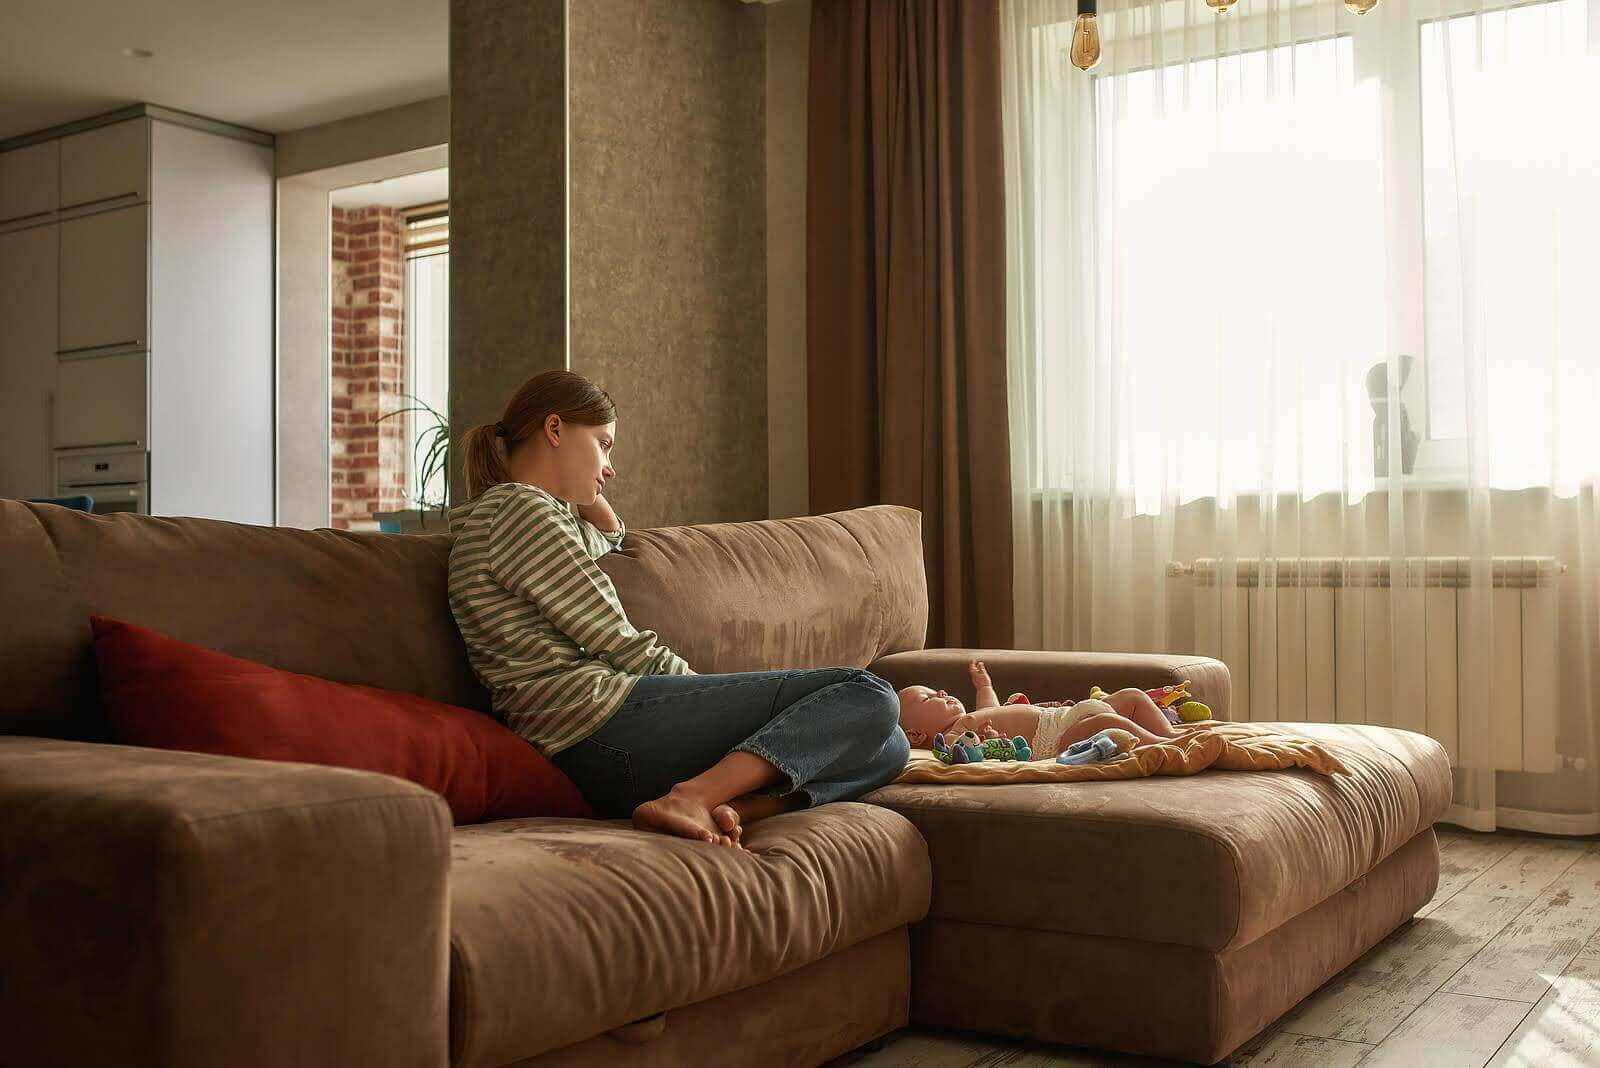 Sad mother sitting on a couch watching her infant. Call today to speak with a trauma therapist in Scotch Plains, NJ.